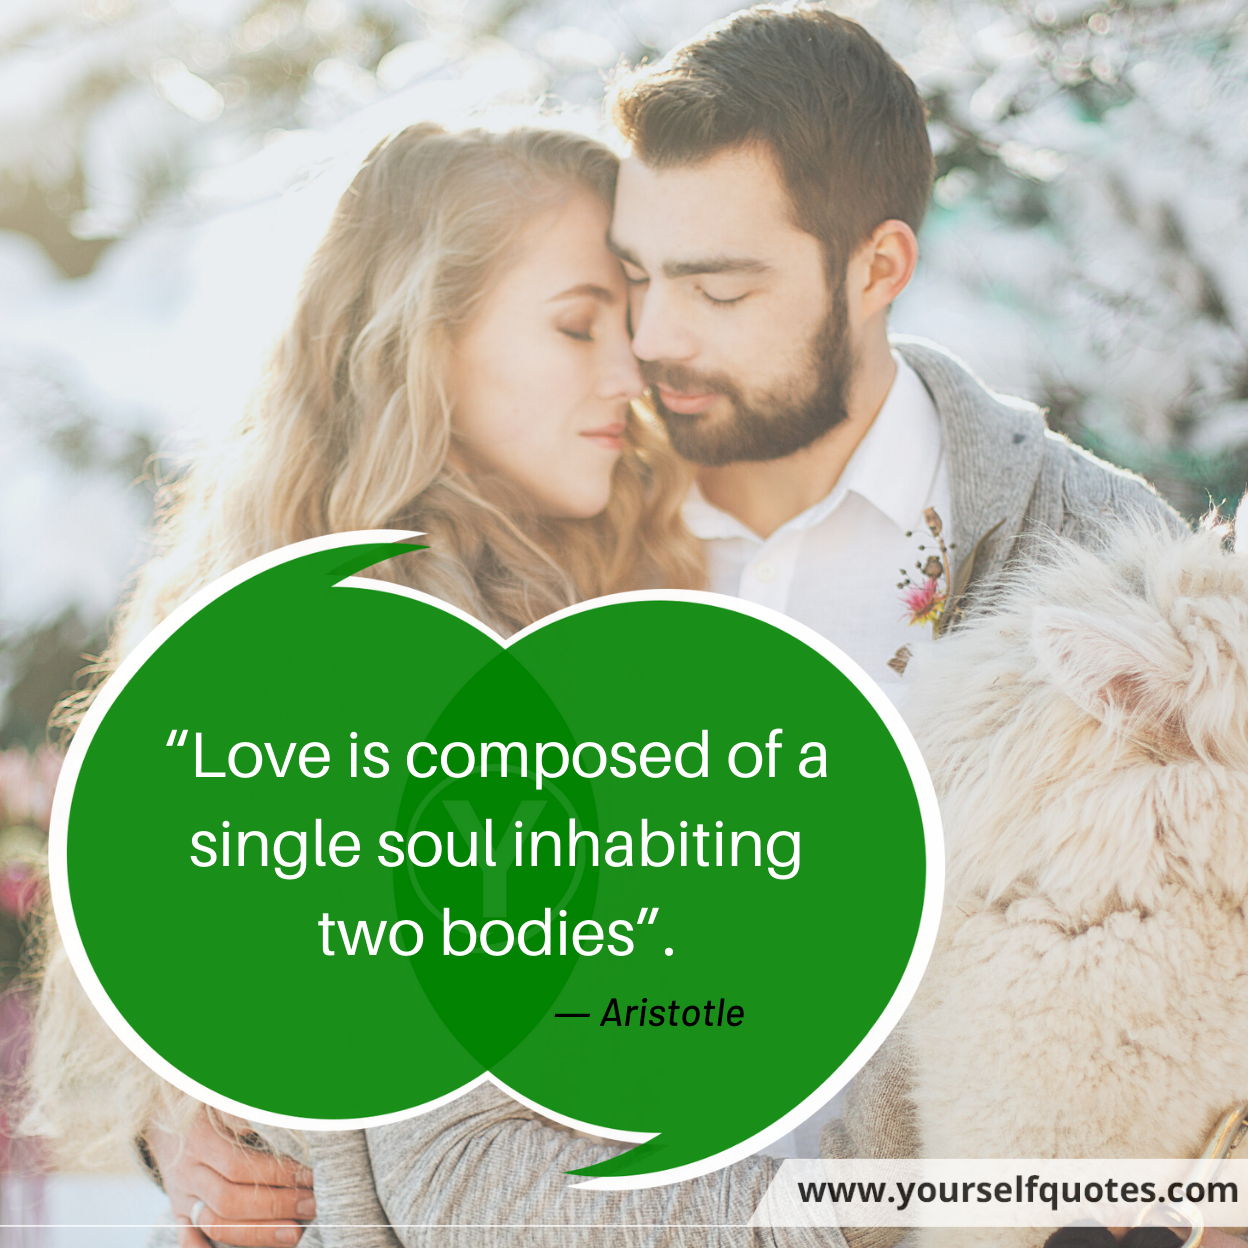 Quotes on Love by Aristotle